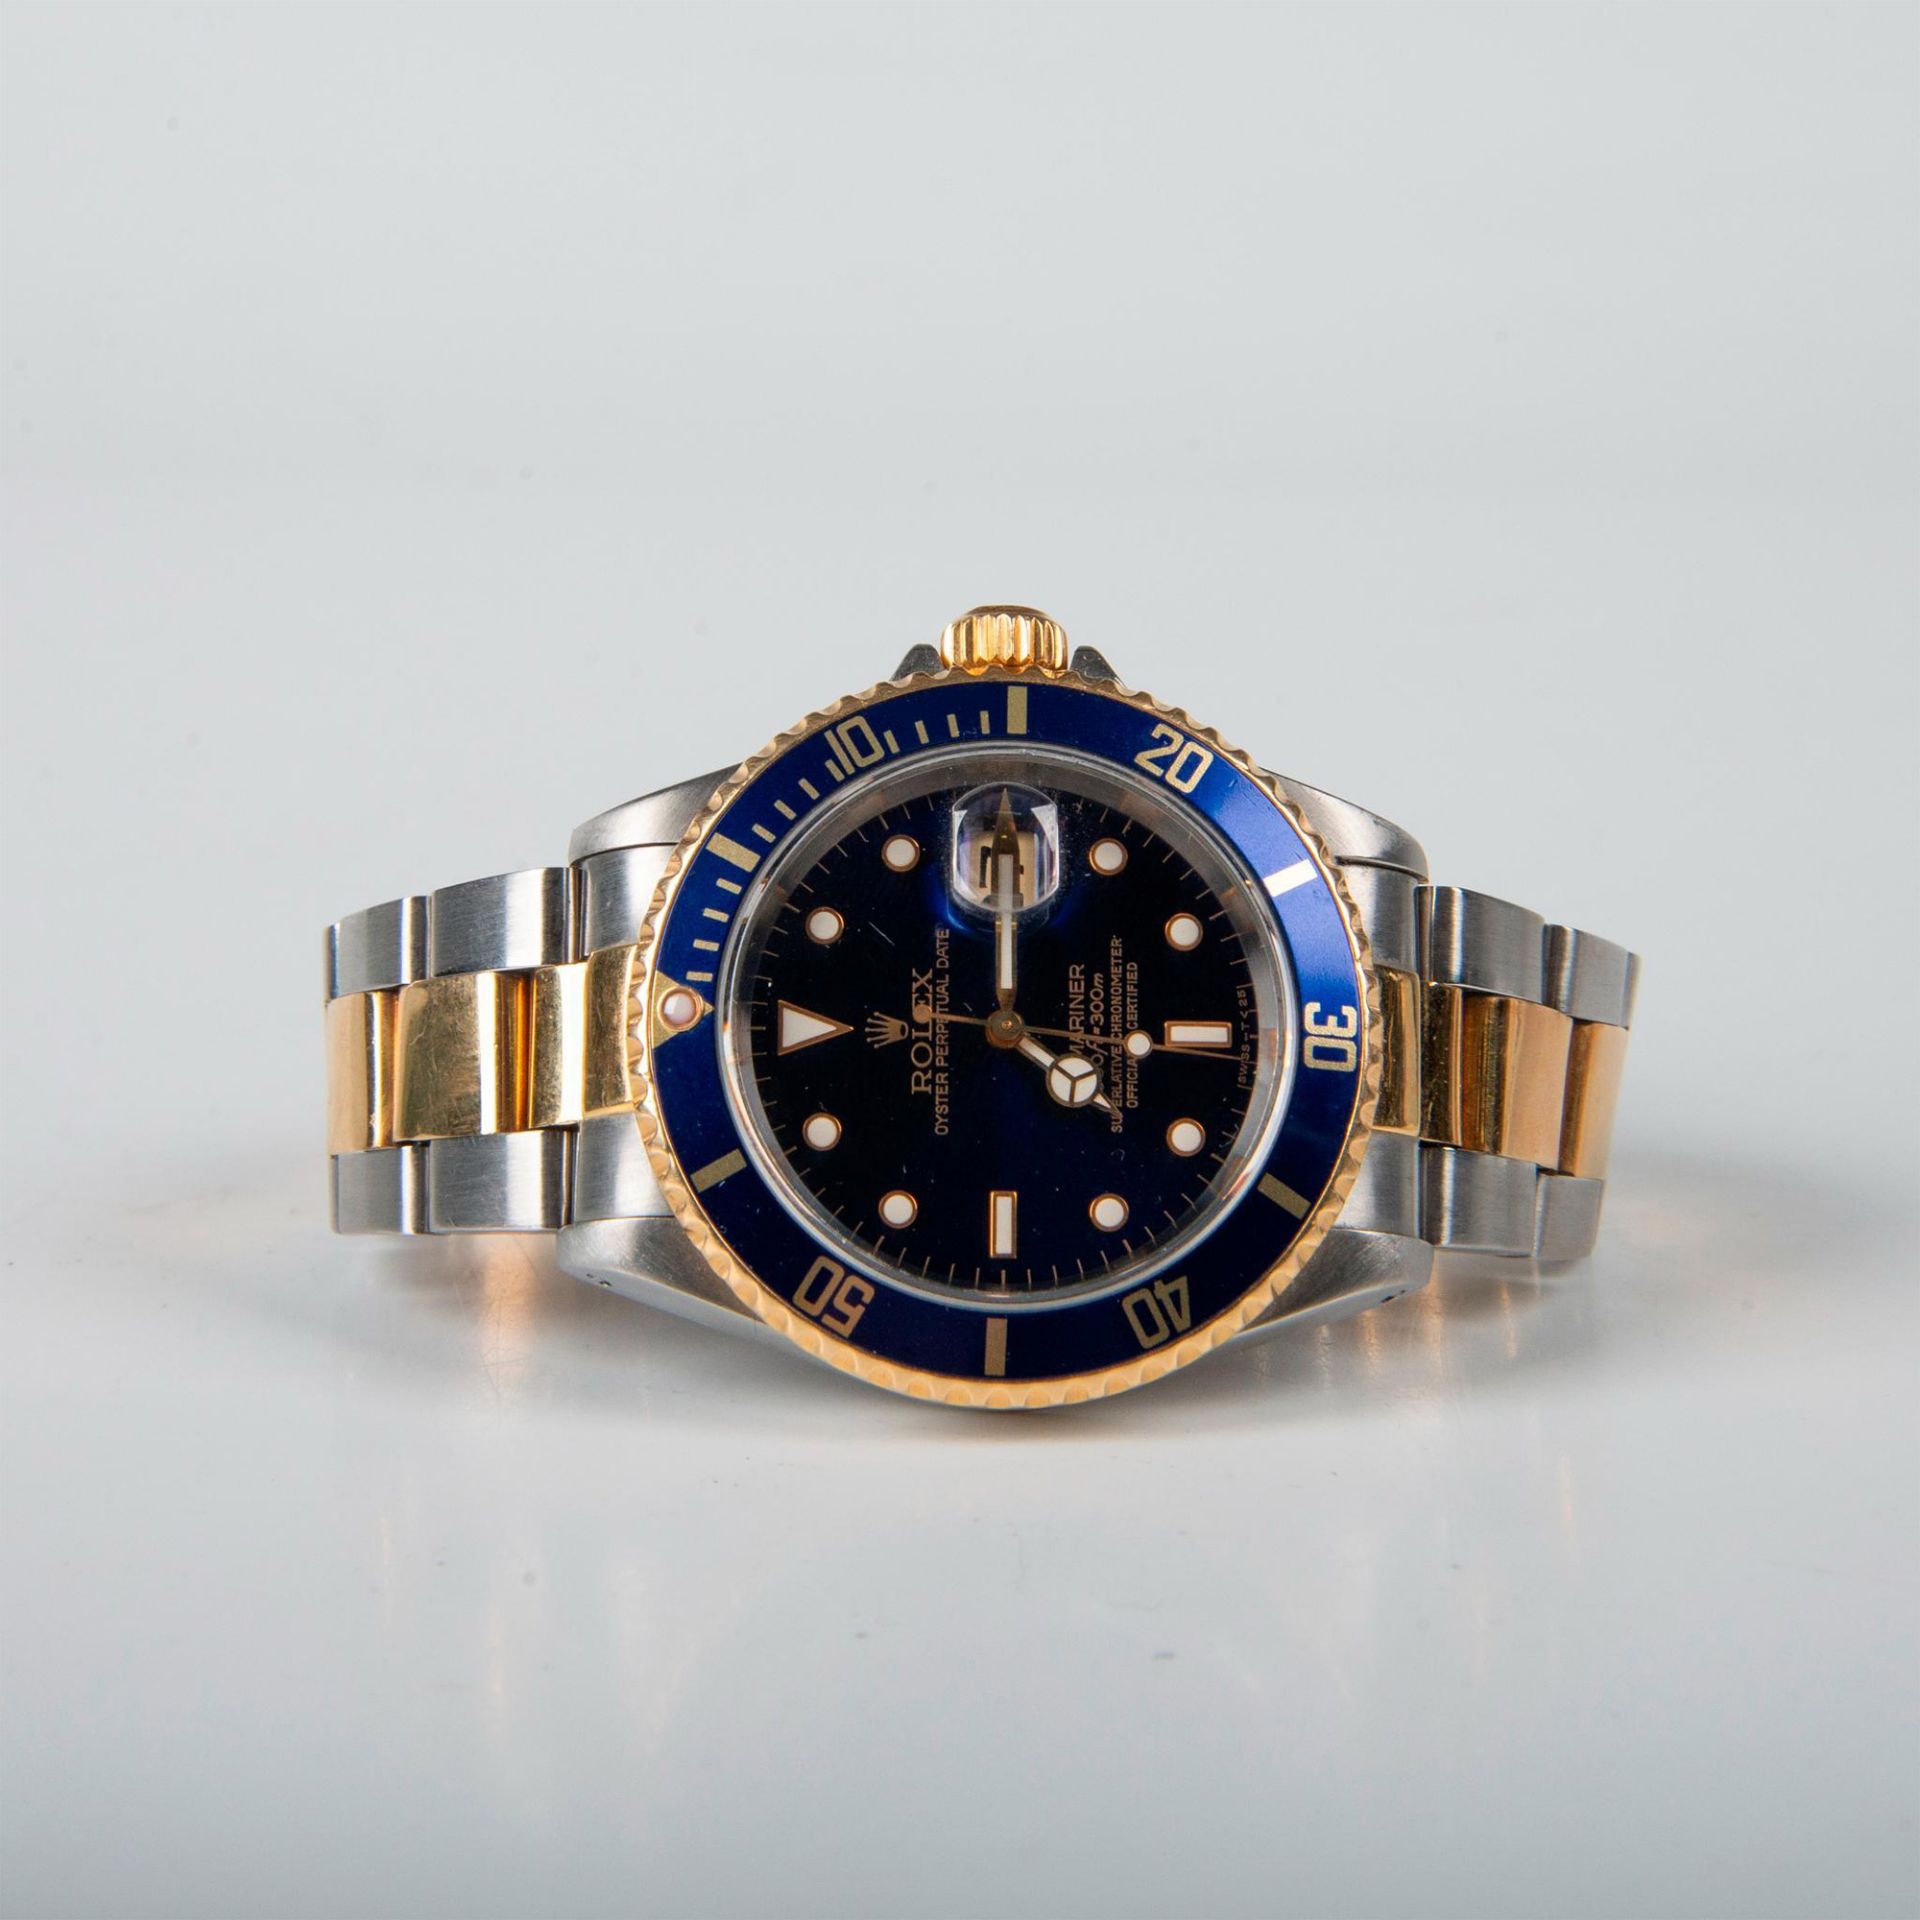 Rolex Submariner Oyster Perpetual Date Watch - Image 15 of 18